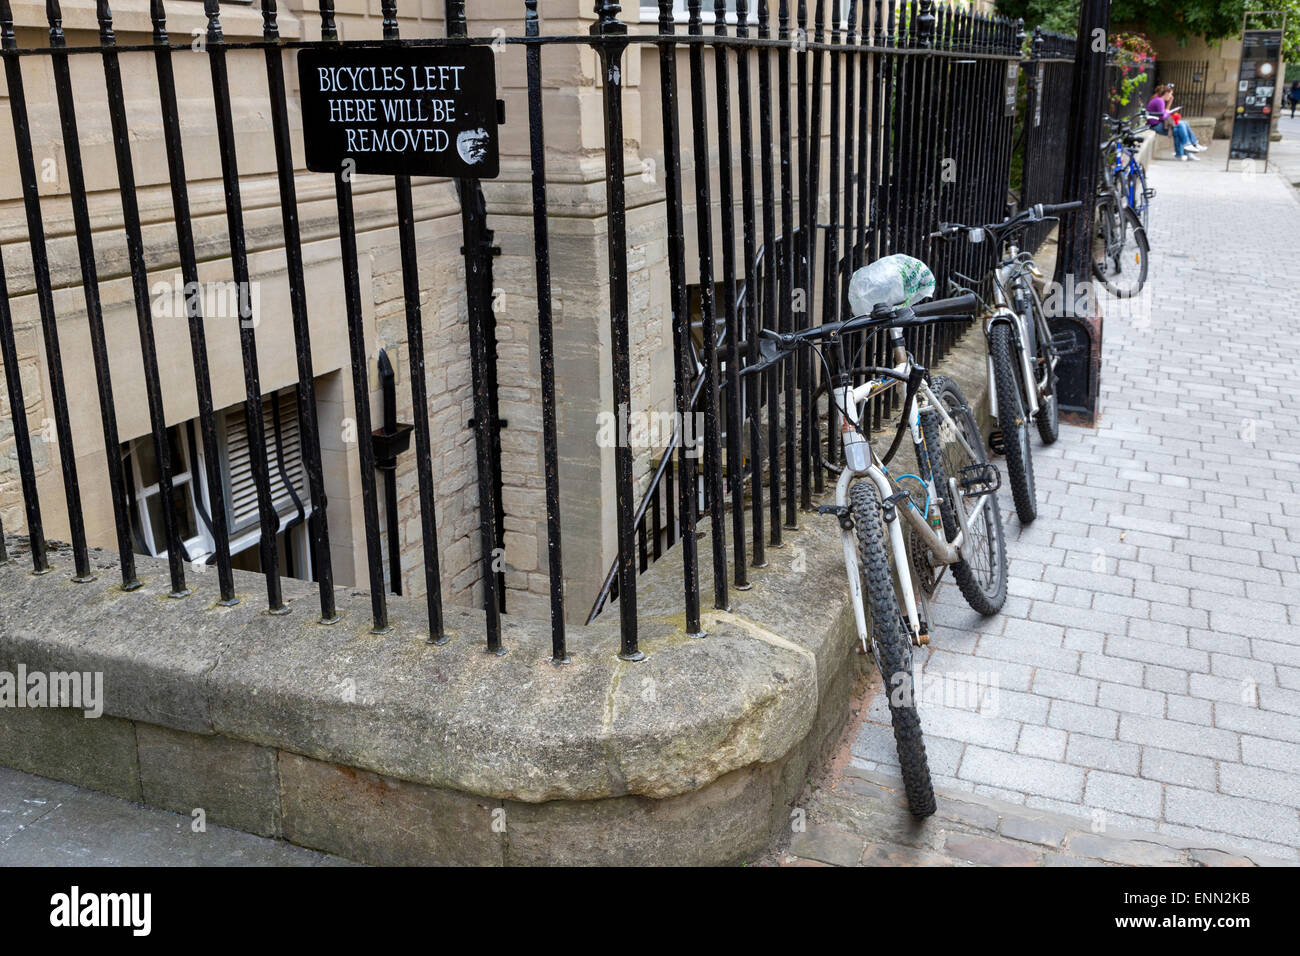 UK, England, Oxford.  Bicycles and Bicycle No Parking Sign. Stock Photo